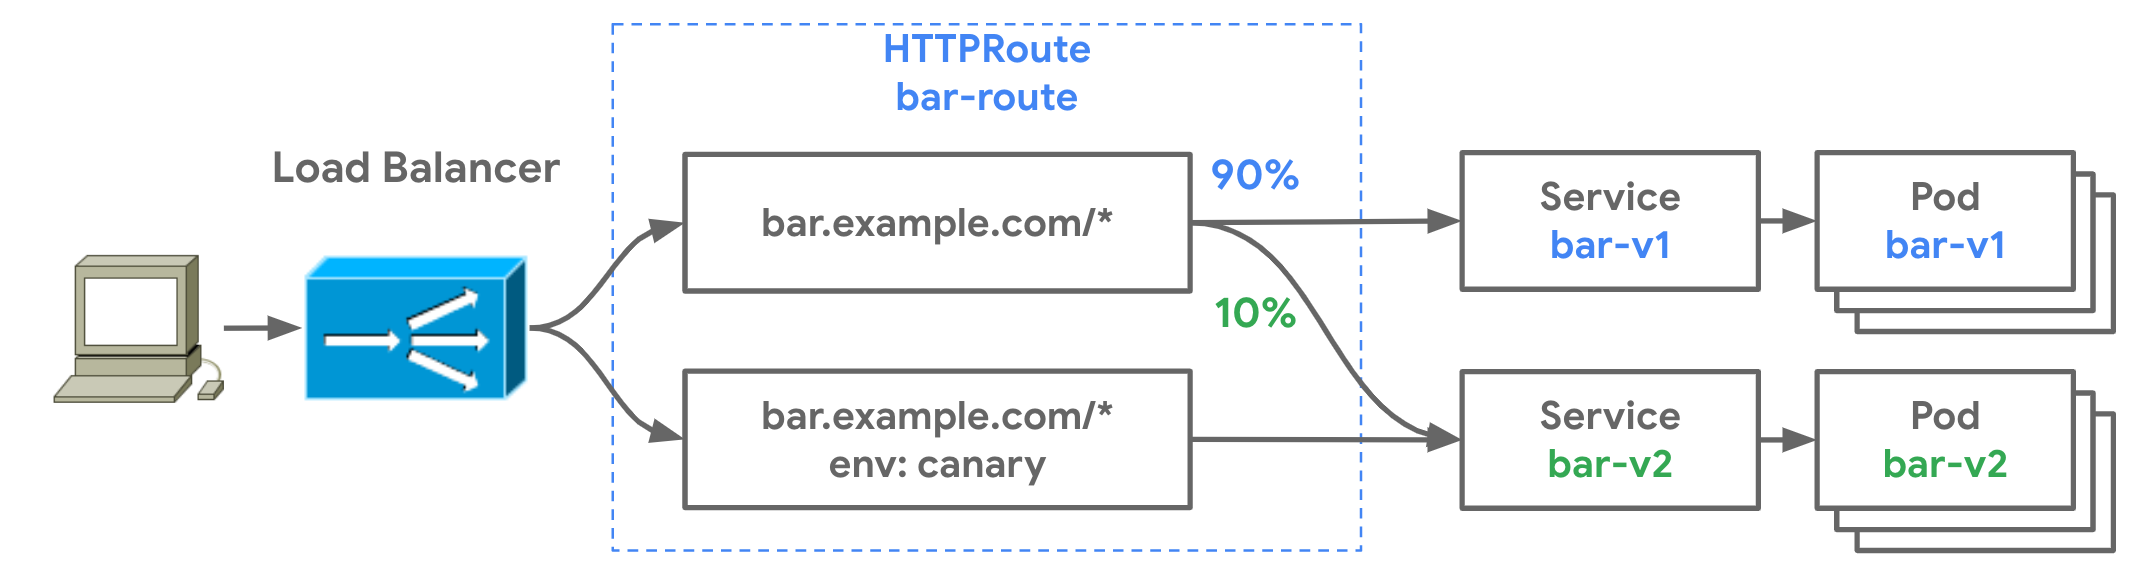 The routing rules configured for the bar-v1 and bar-v2 Services